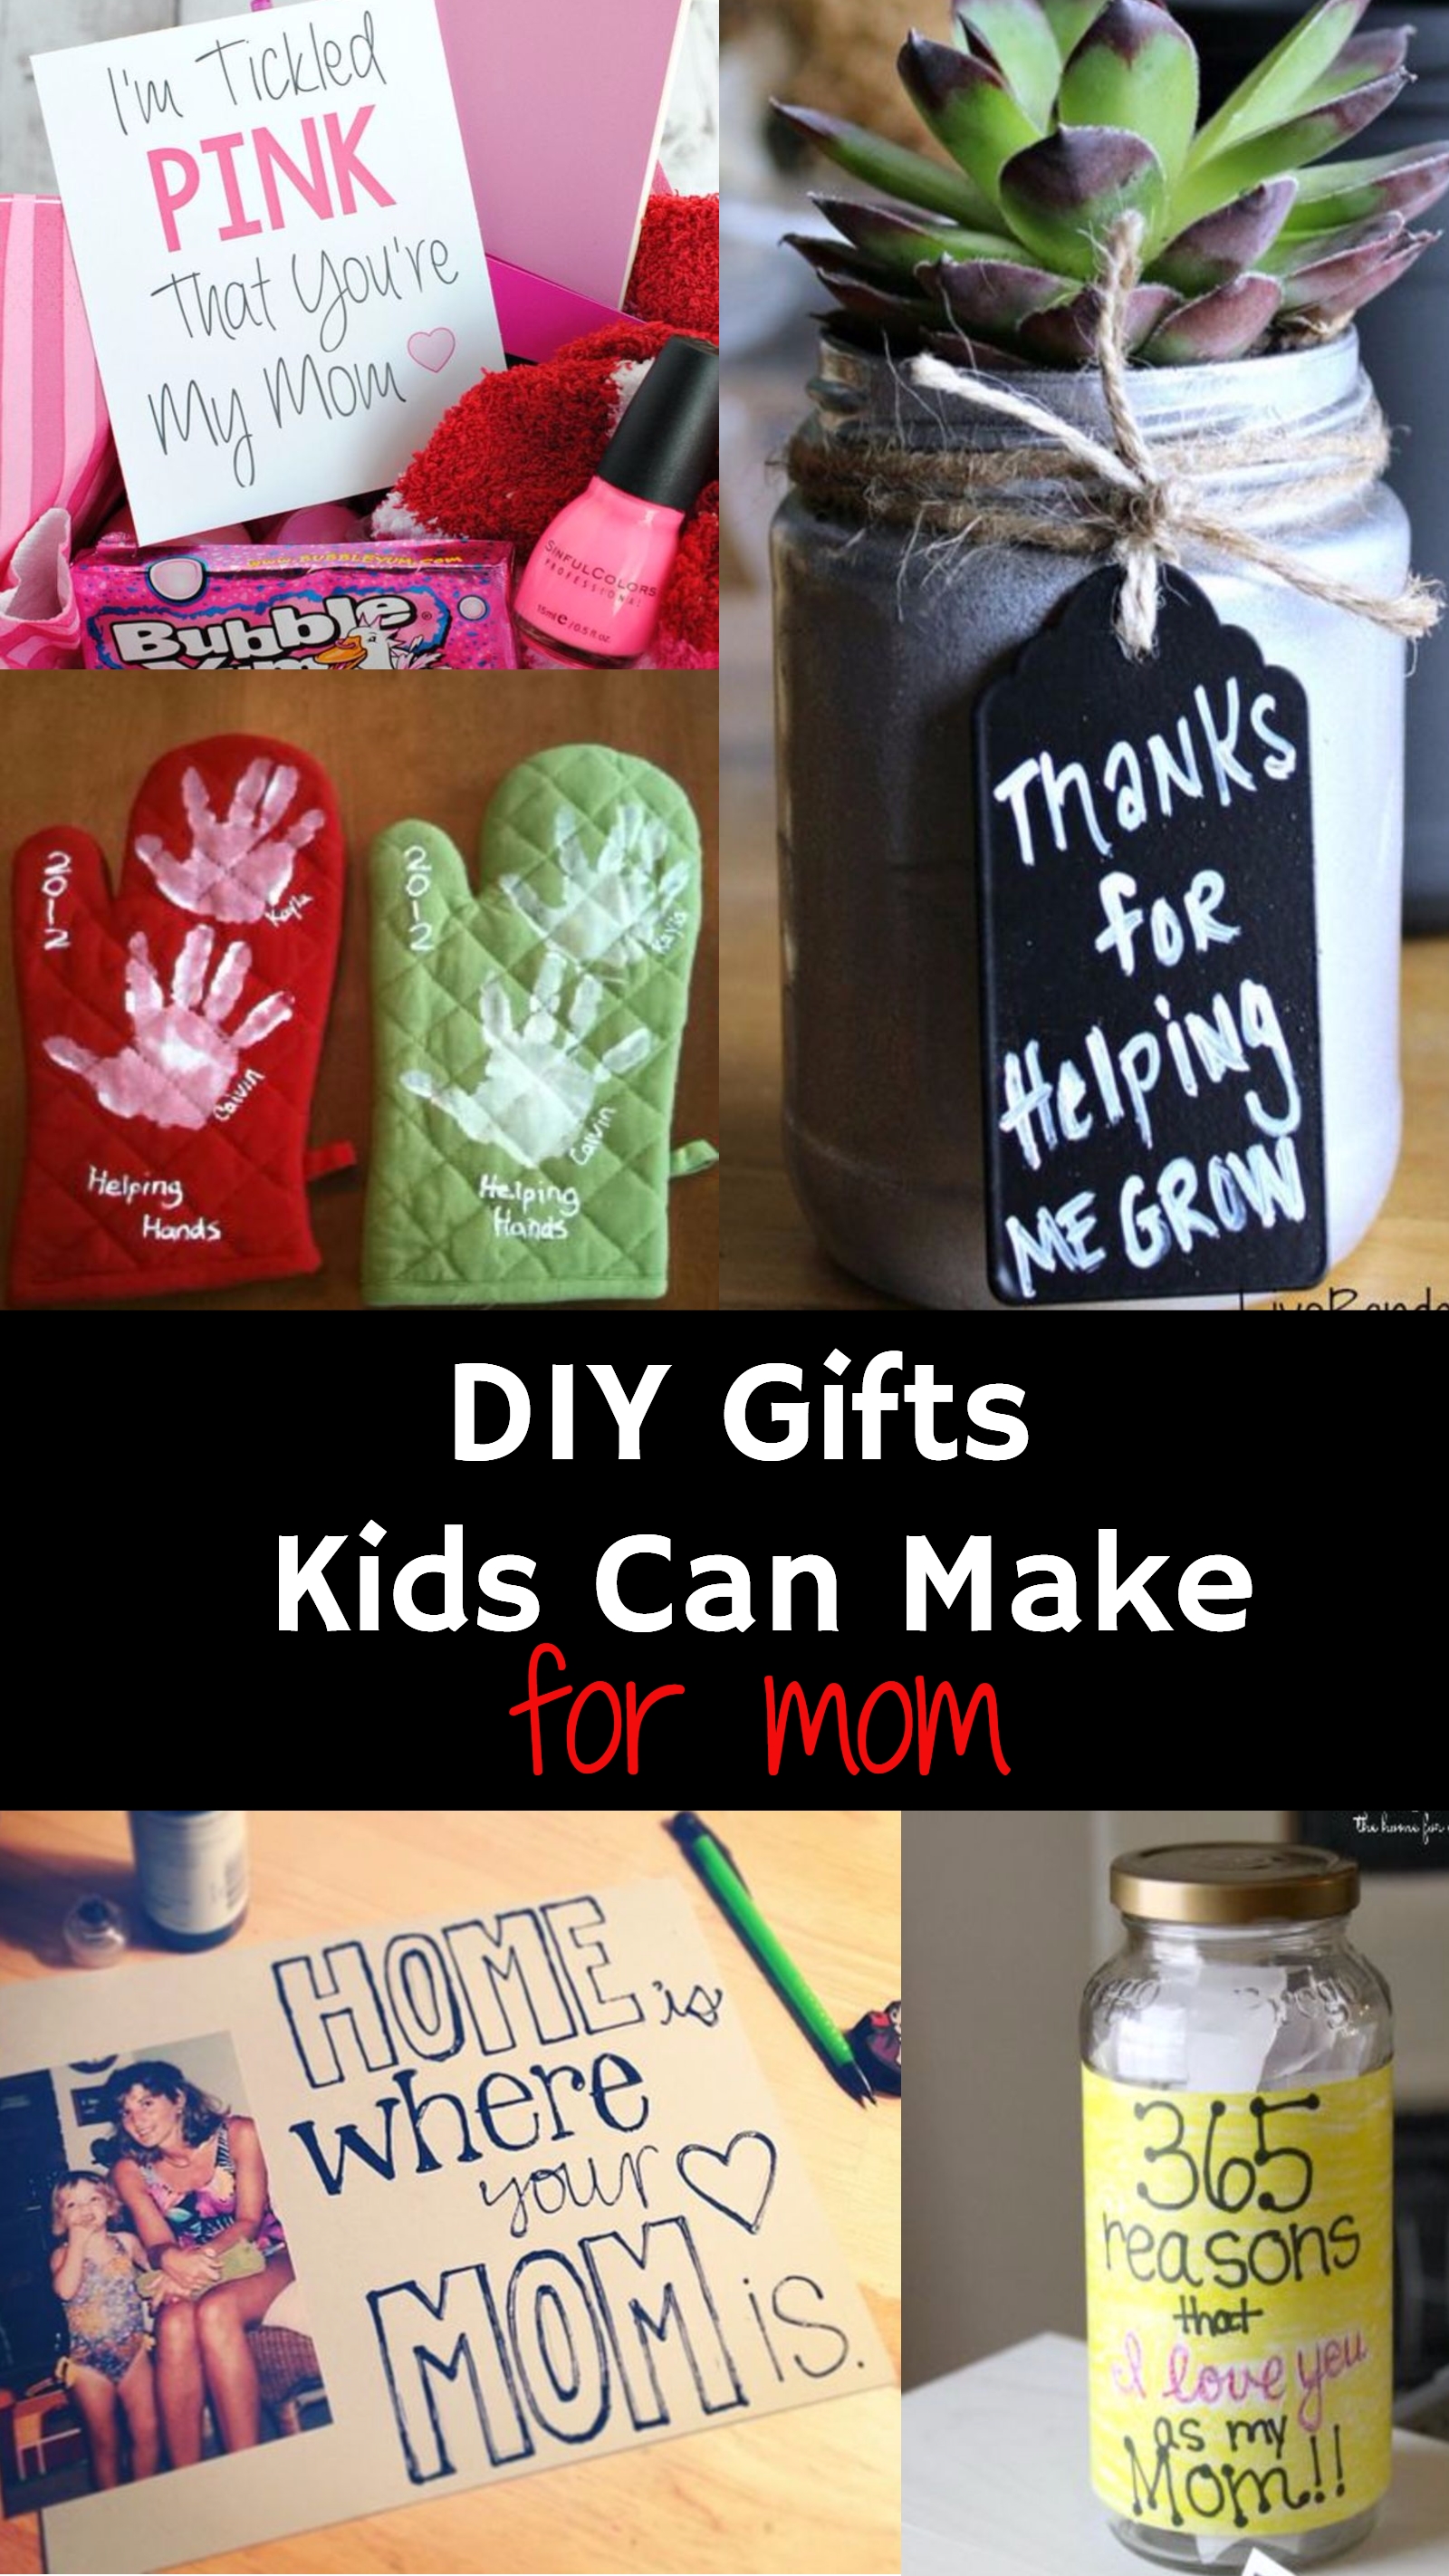 10 Lovely Homemade Birthday Ideas For Mom diy gifts for mom from kids grandmothers aunt and birthday gifts 3 2022